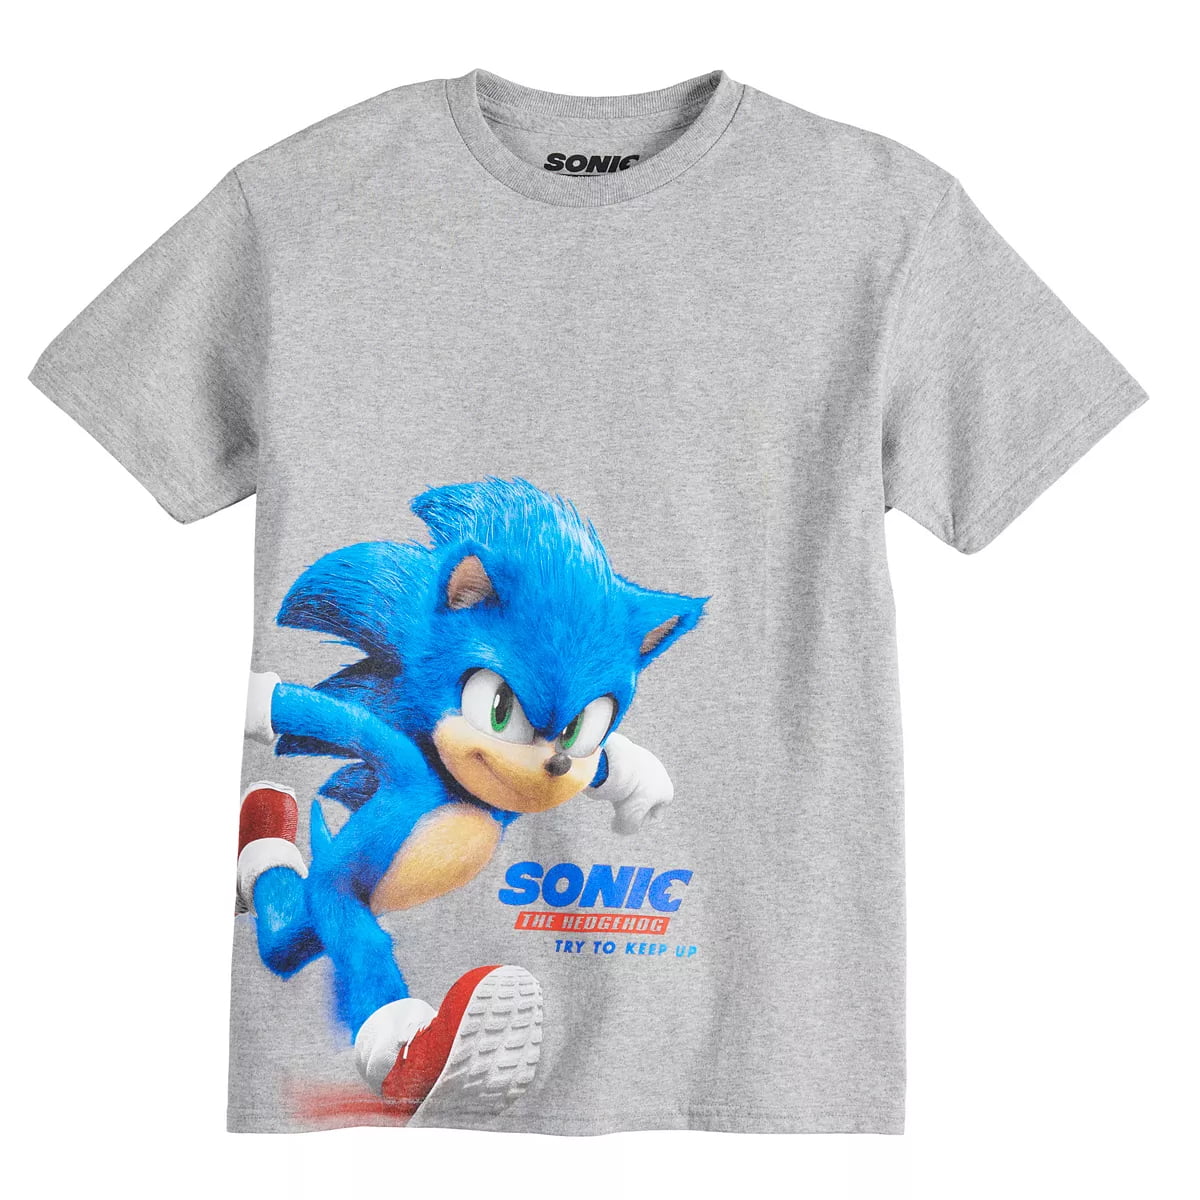 SONIC THE HEDGEHOG MOVIE T-SHIRT BIRTHDAY NOVELTY GIFT TOP KIDS ADULTS UNISEX